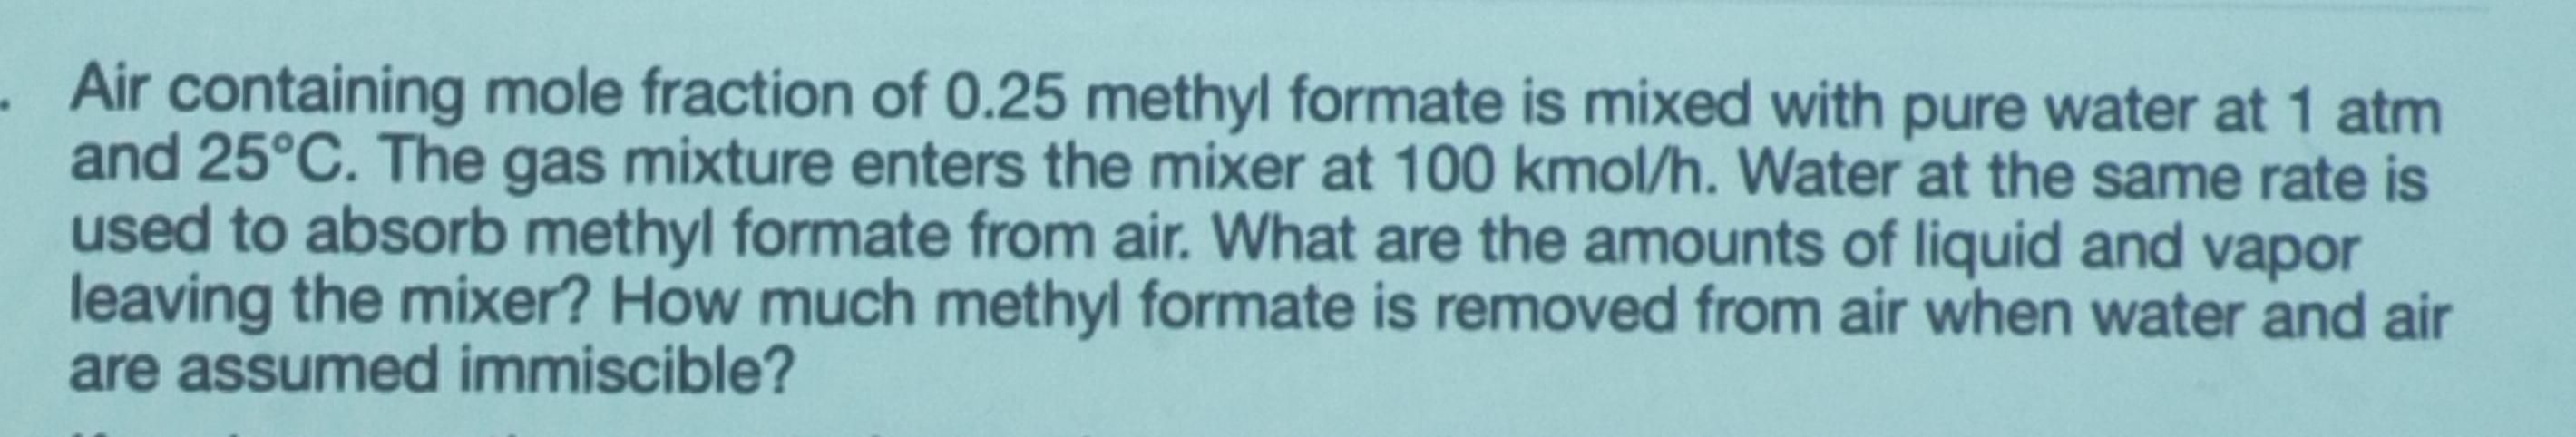 Air containing mole fraction of 0.25 methyl formate is mixed with pure water at 1 atm and 25C. The gas